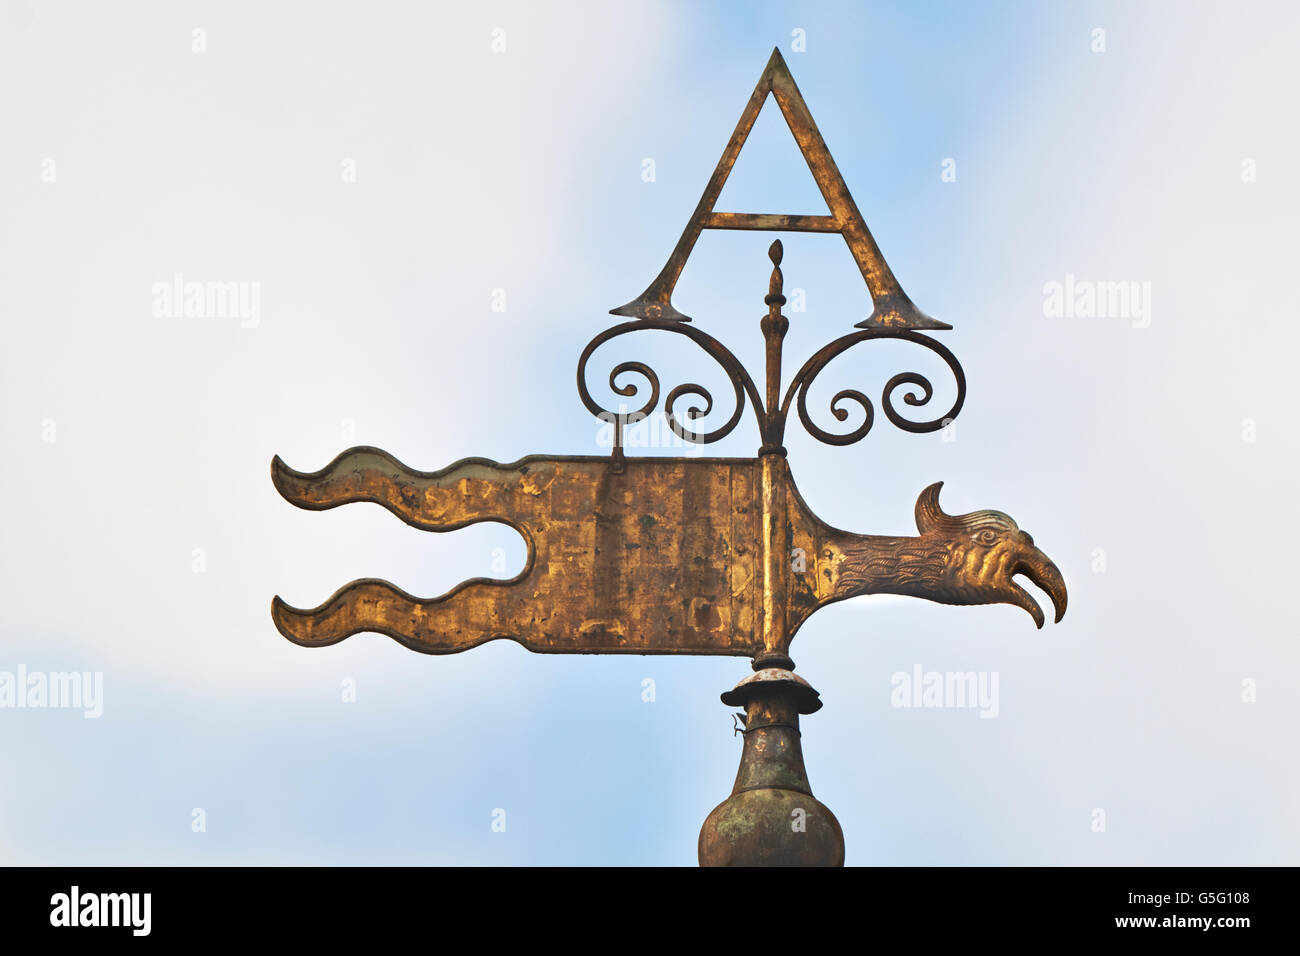 St Anne & St Agnes church, London: weathervane letter A with beaked bird Stock Photo